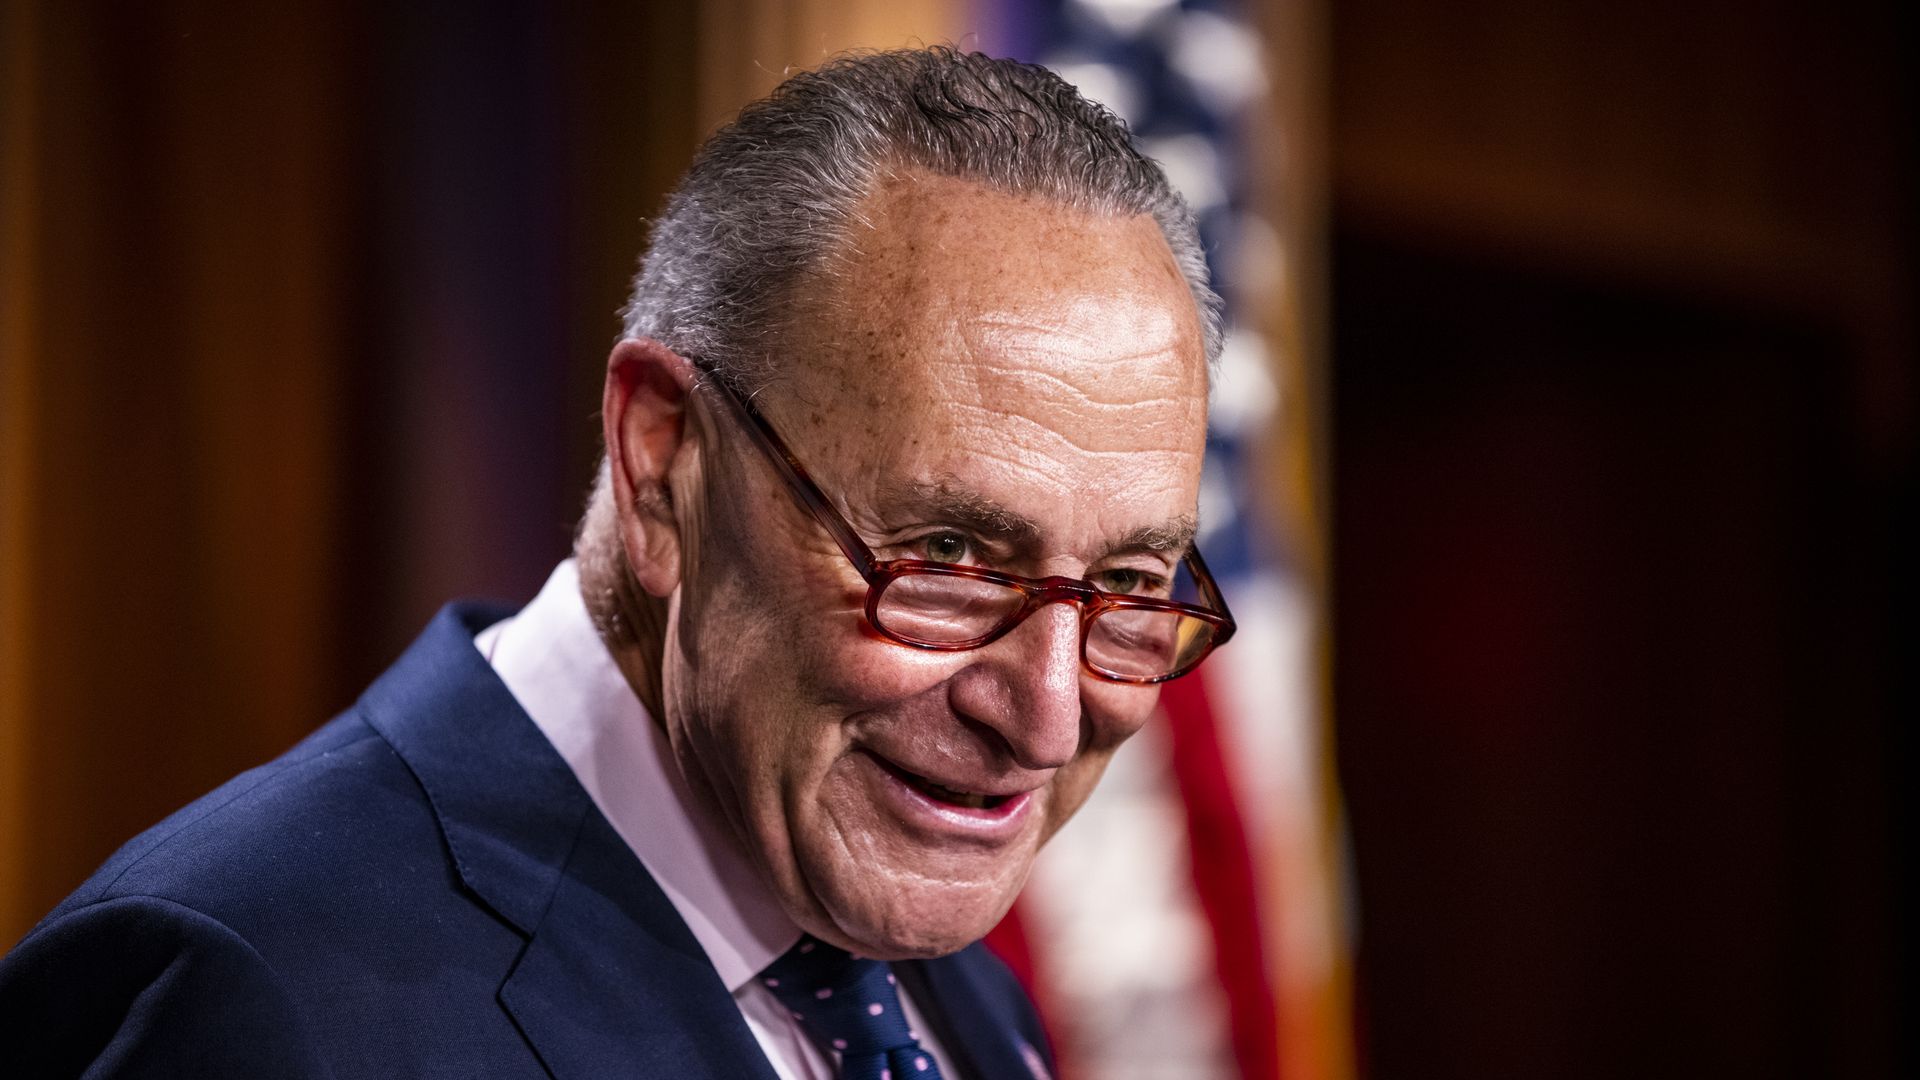 U.S. Senate Majority Leader Chuck Schumer, a Democrat from New York, speaks during a news conference at the U.S. Capitol in Washington, D.C., U.S., on Wednesday, Aug. 11, 2021.